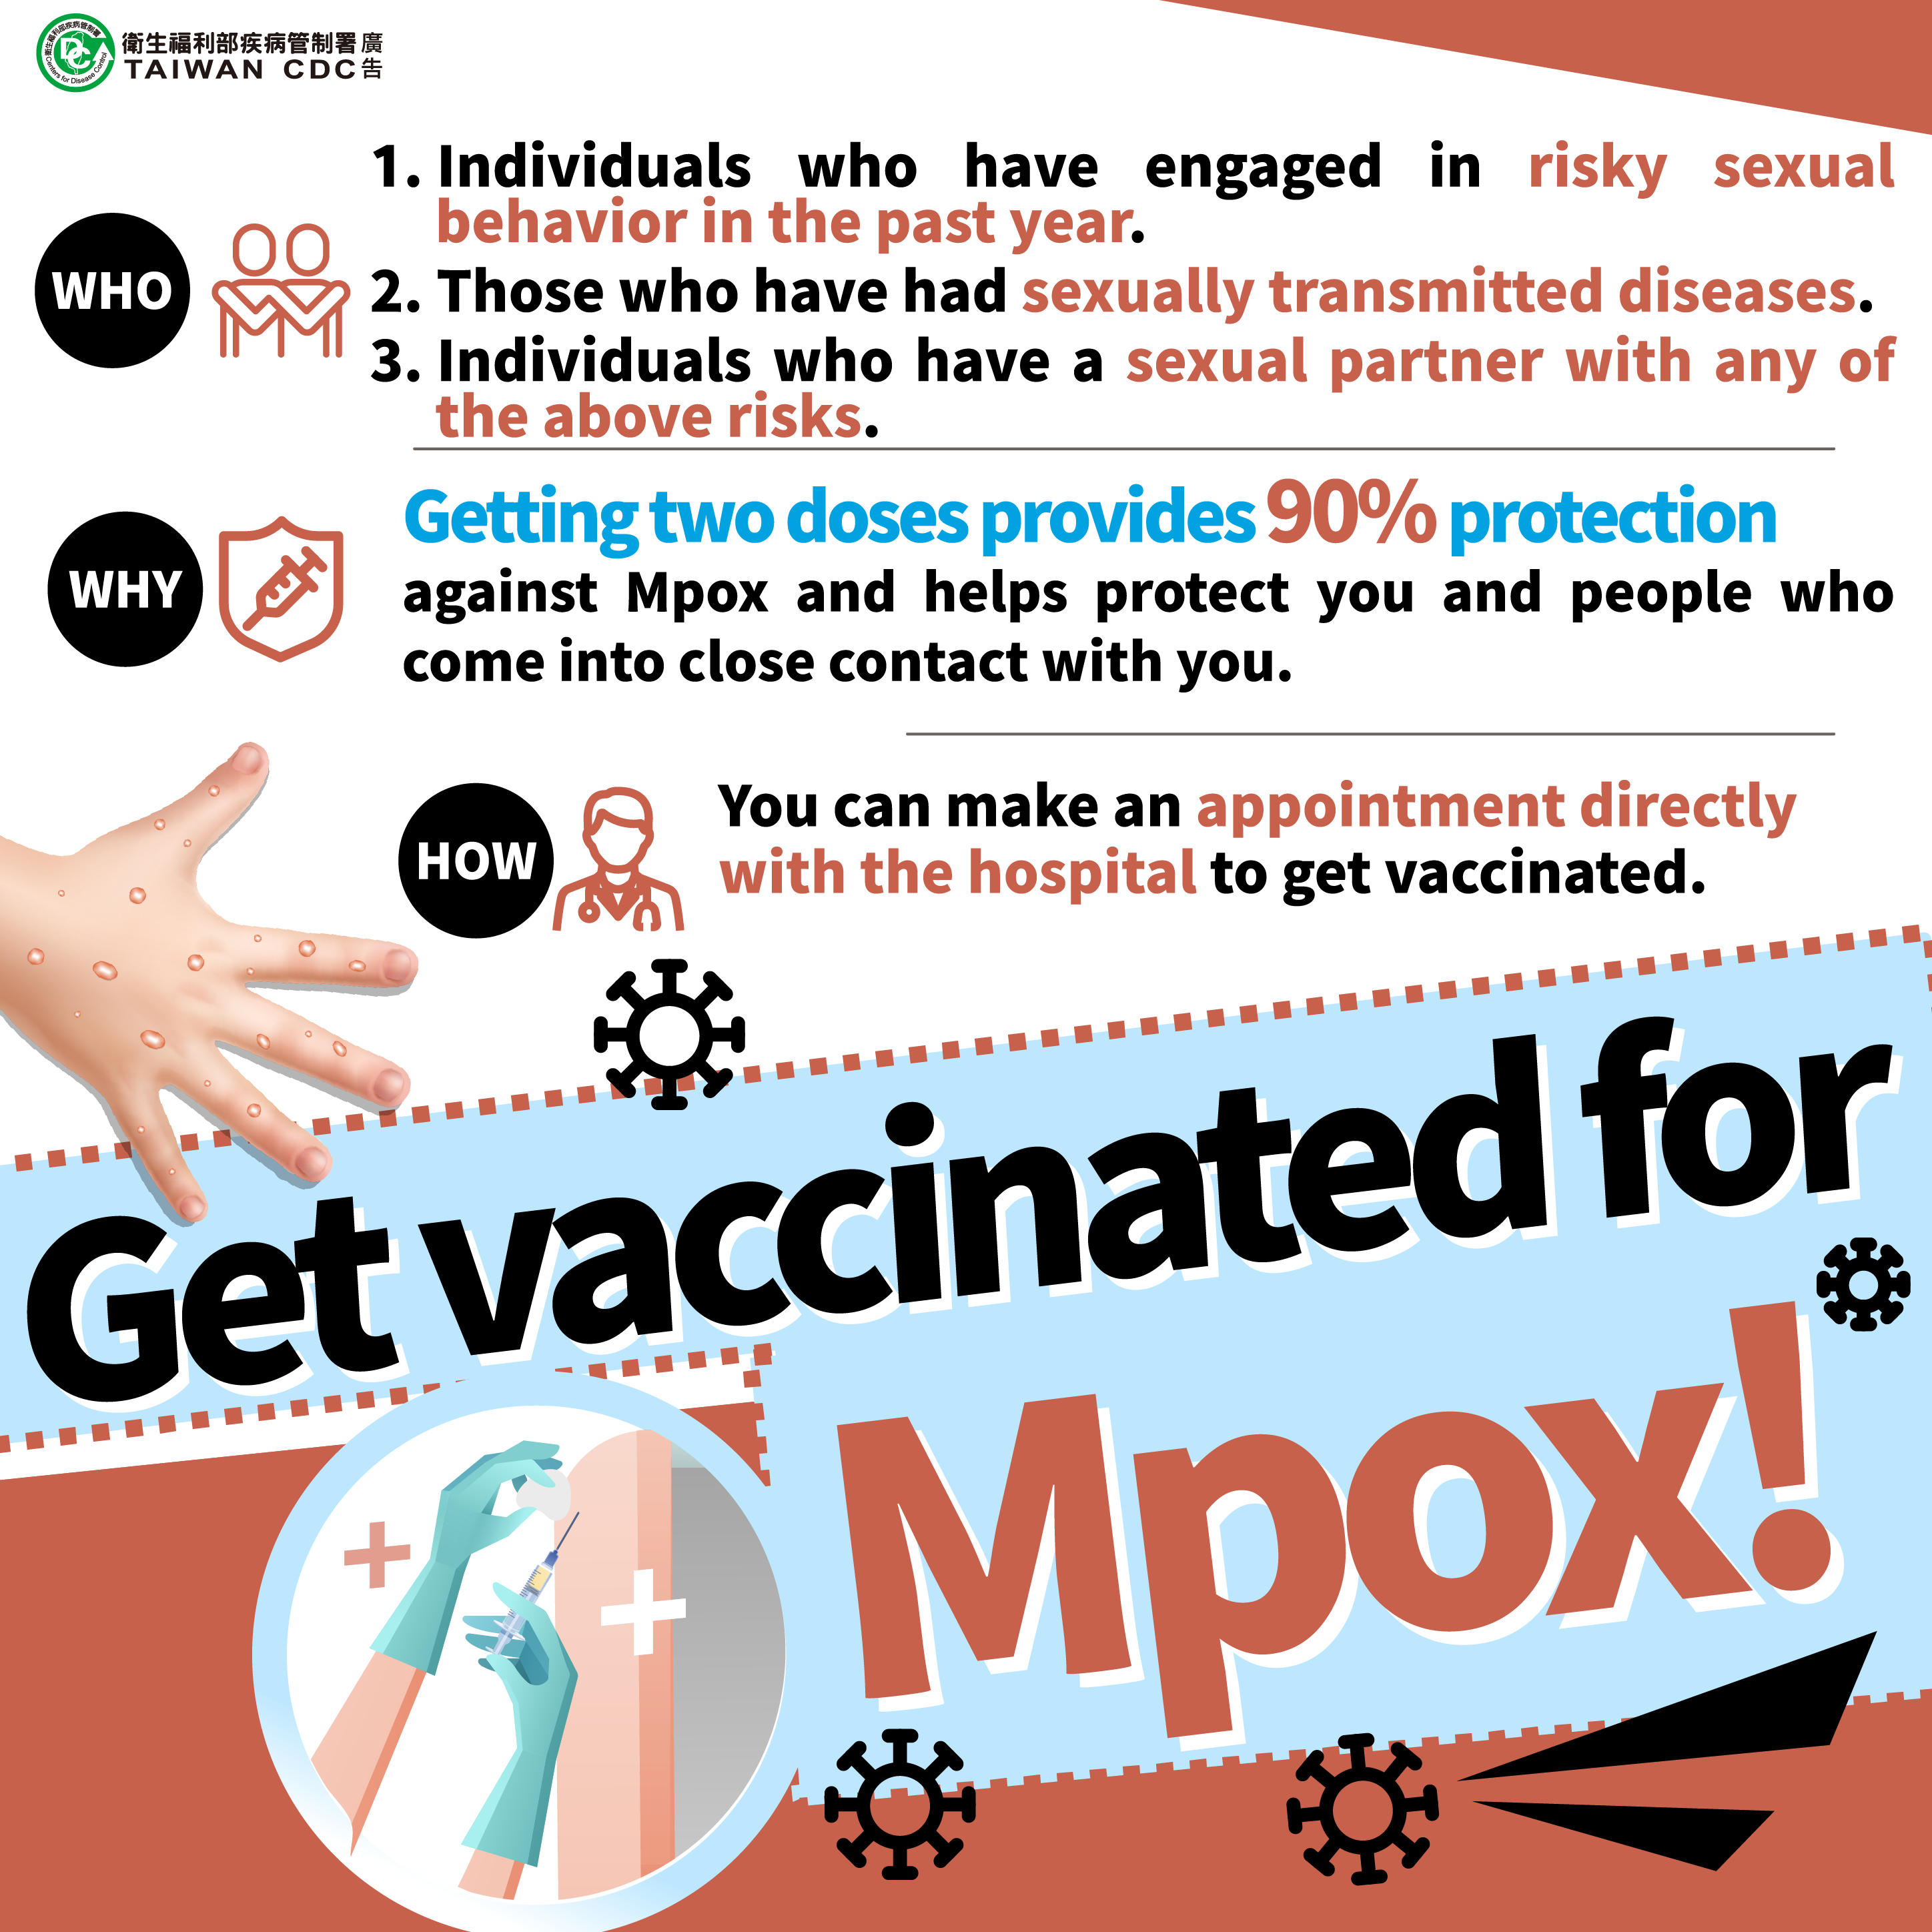 Get+vaccinated+for+Mpox！